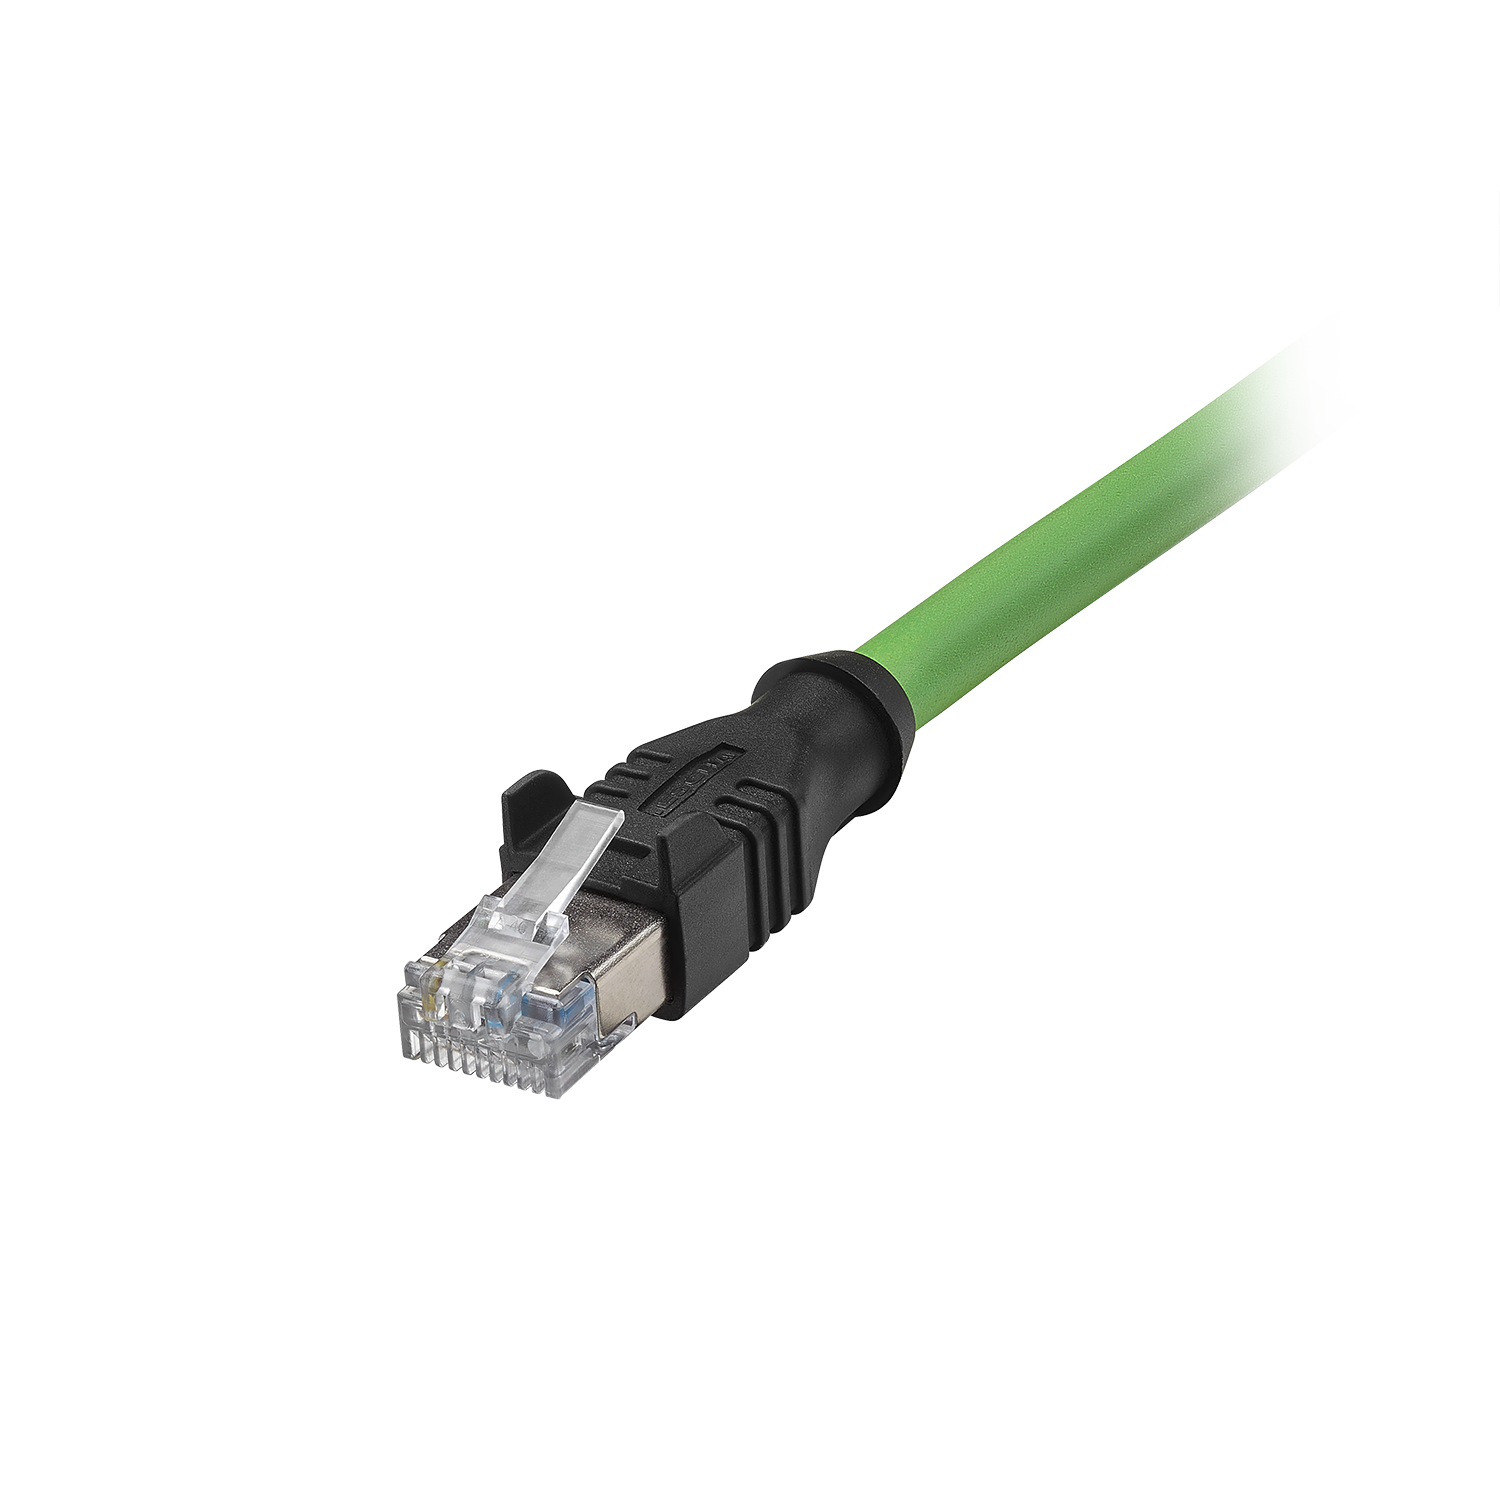 RJ45 Connector with cable ,   